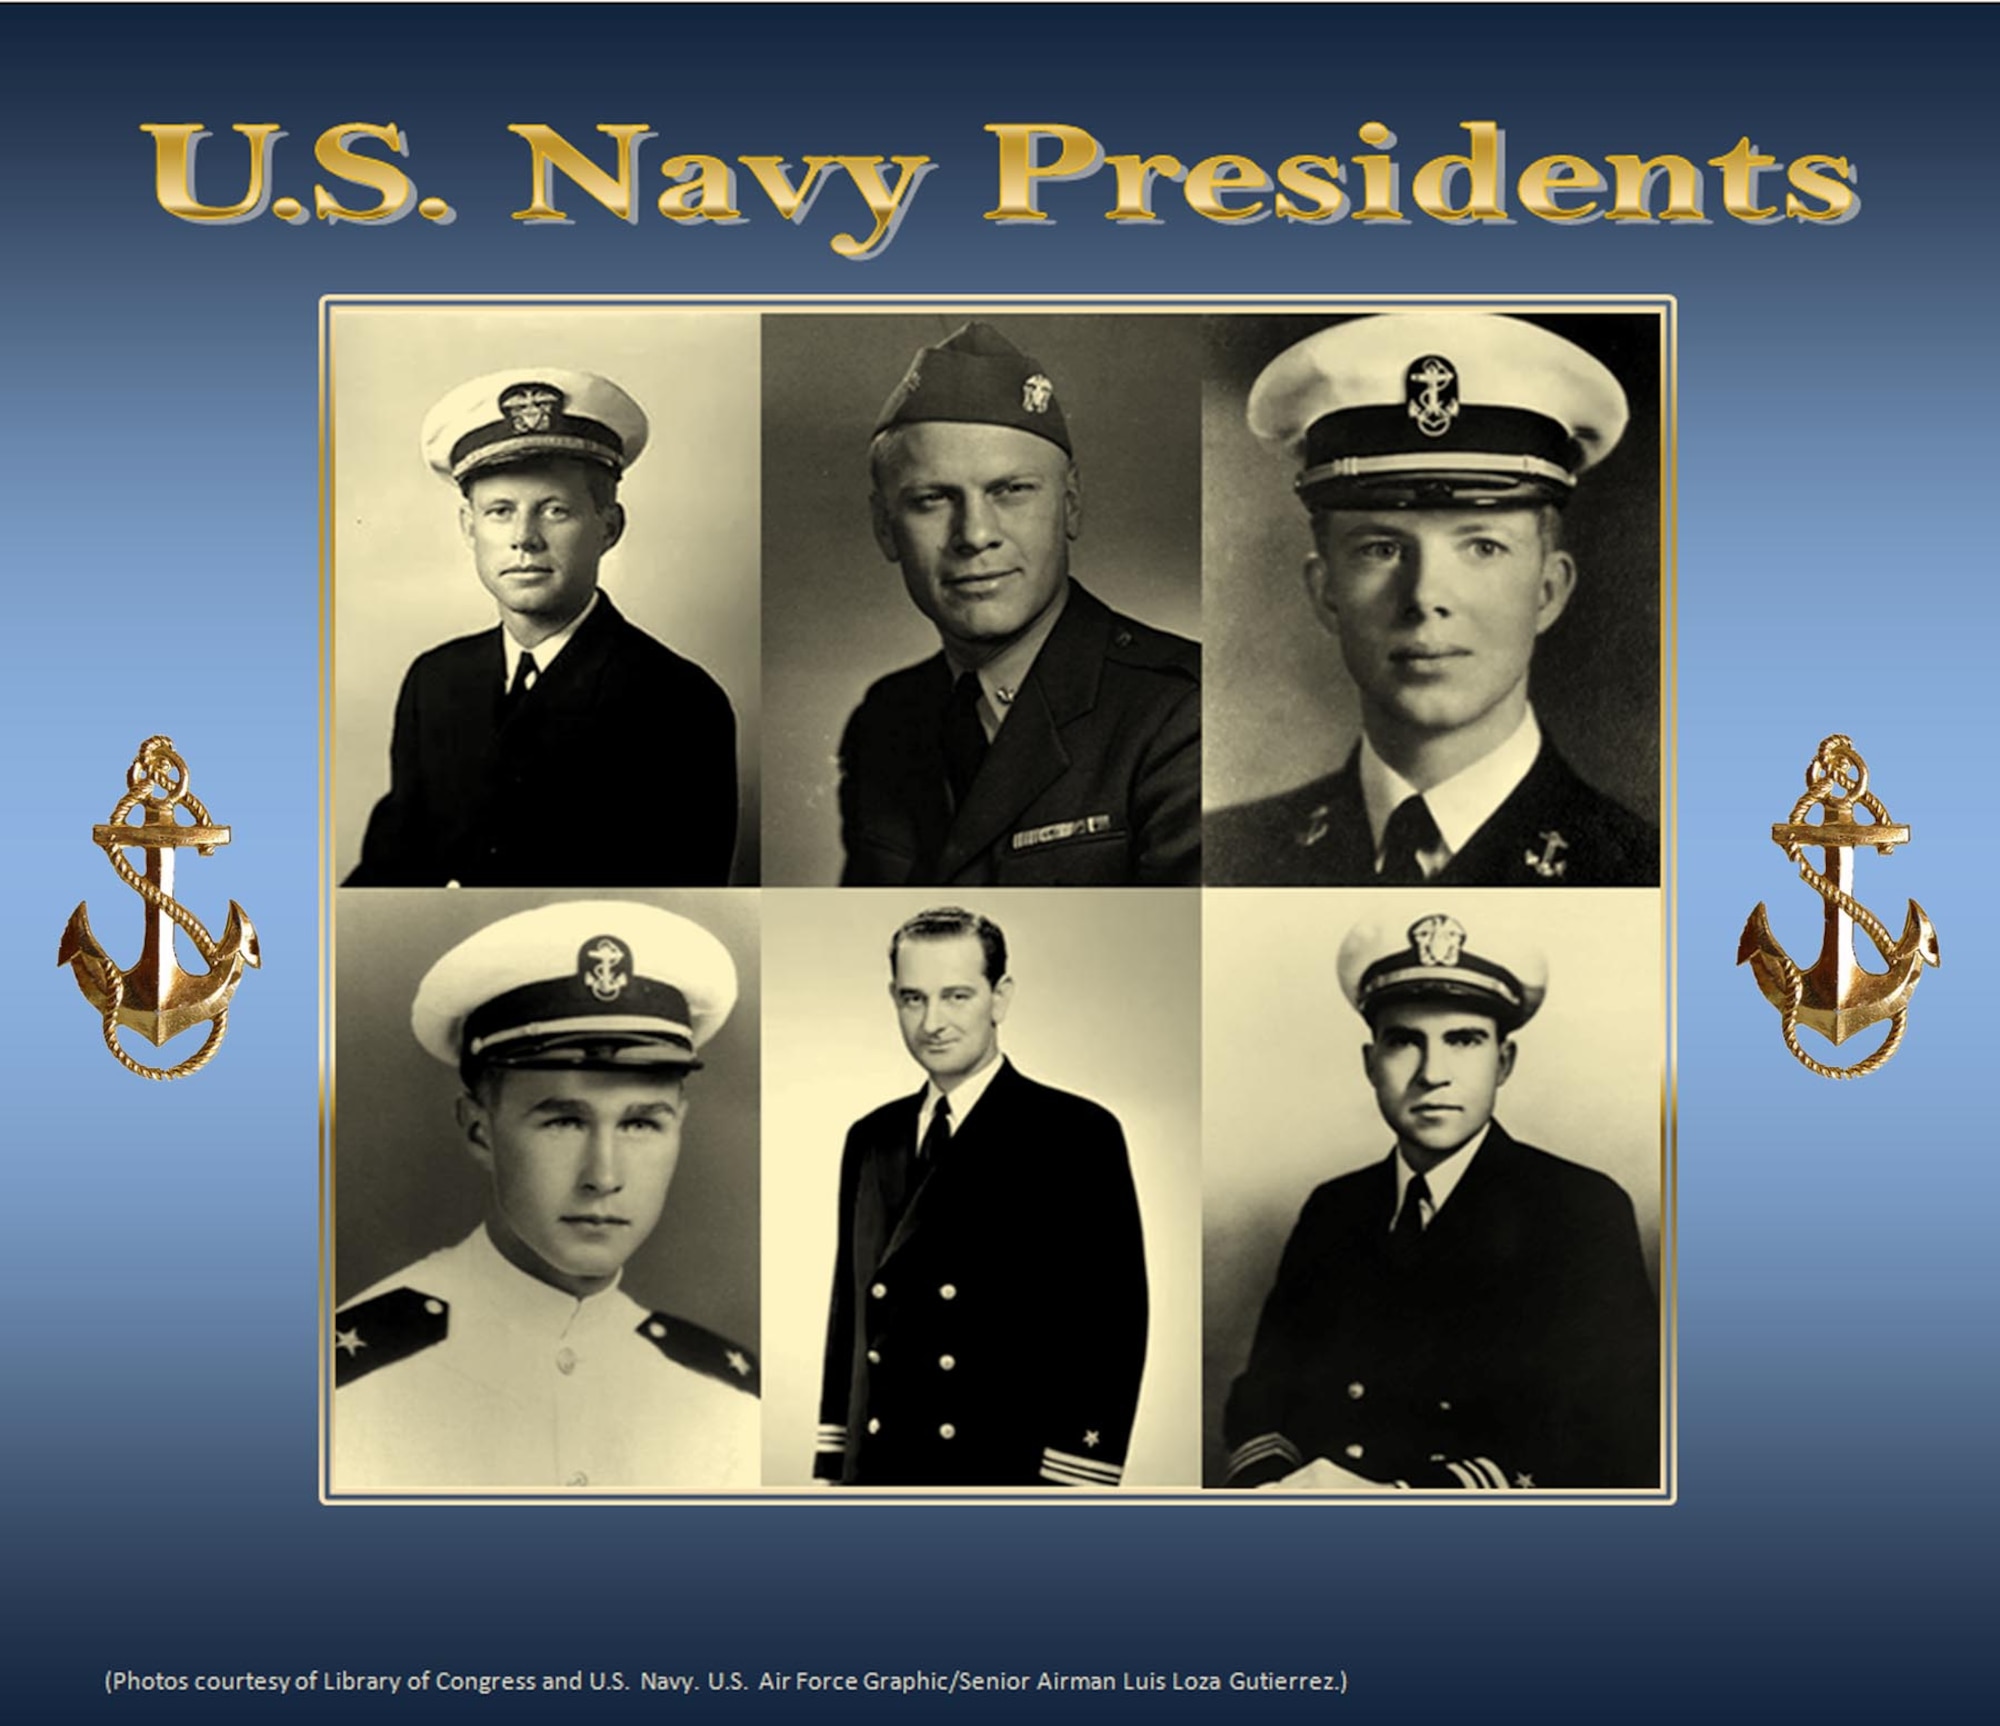 Six out of the 44 U.S. presidents served as officers in the Navy. In military uniforms pictured from left to right top row are: John F. Kennedy, Gerald. R. Ford, Jimmy Carter, George H. W. Bush, Lyndon B. Johnson and Richard Nixon. (Photos courtesy of Library of Congress and U.S. Navy. U.S. Air Force graphic/Senior Airman Luis Loza Gutierrez)